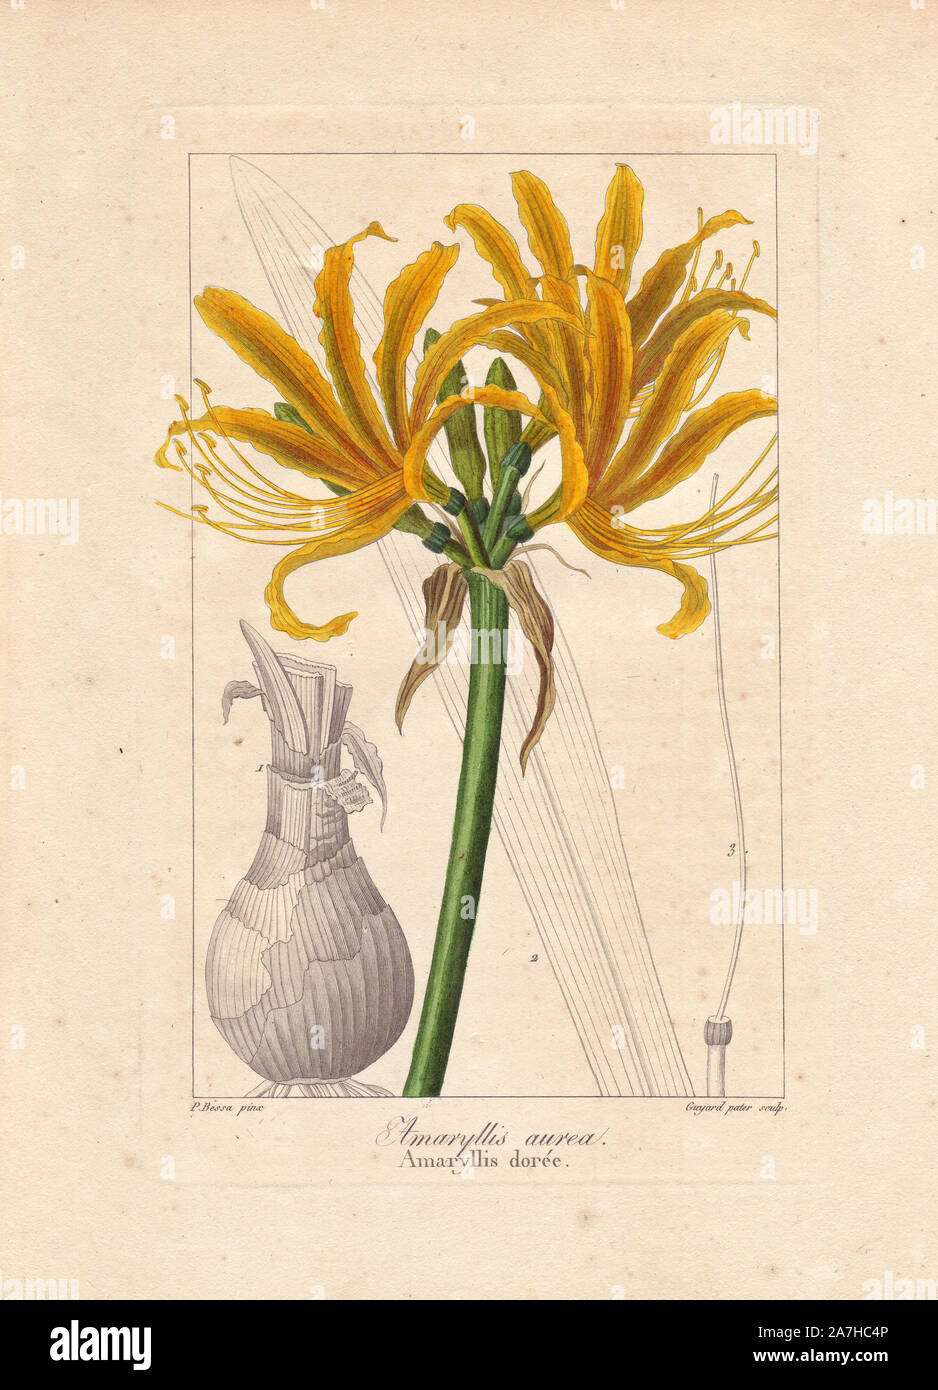 Golden flame lily, Pyrolirion aureum, native to Peru and Chile. Handcoloured stipple engraving on copper by Guyard Pater from a botanical illustration by Pancrace Bessa from Mordant de Launay's 'Herbier General de l'Amateur,' Audot, Paris, 1820. The Herbier was published from 1810 to 1827 and edited by Mordant de Launay and Loiseleur-Deslongchamps. Bessa (1772-1830s), along with Redoute and Turpin, is considered one of the greatest French botanical artists of the 19th century. Stock Photo